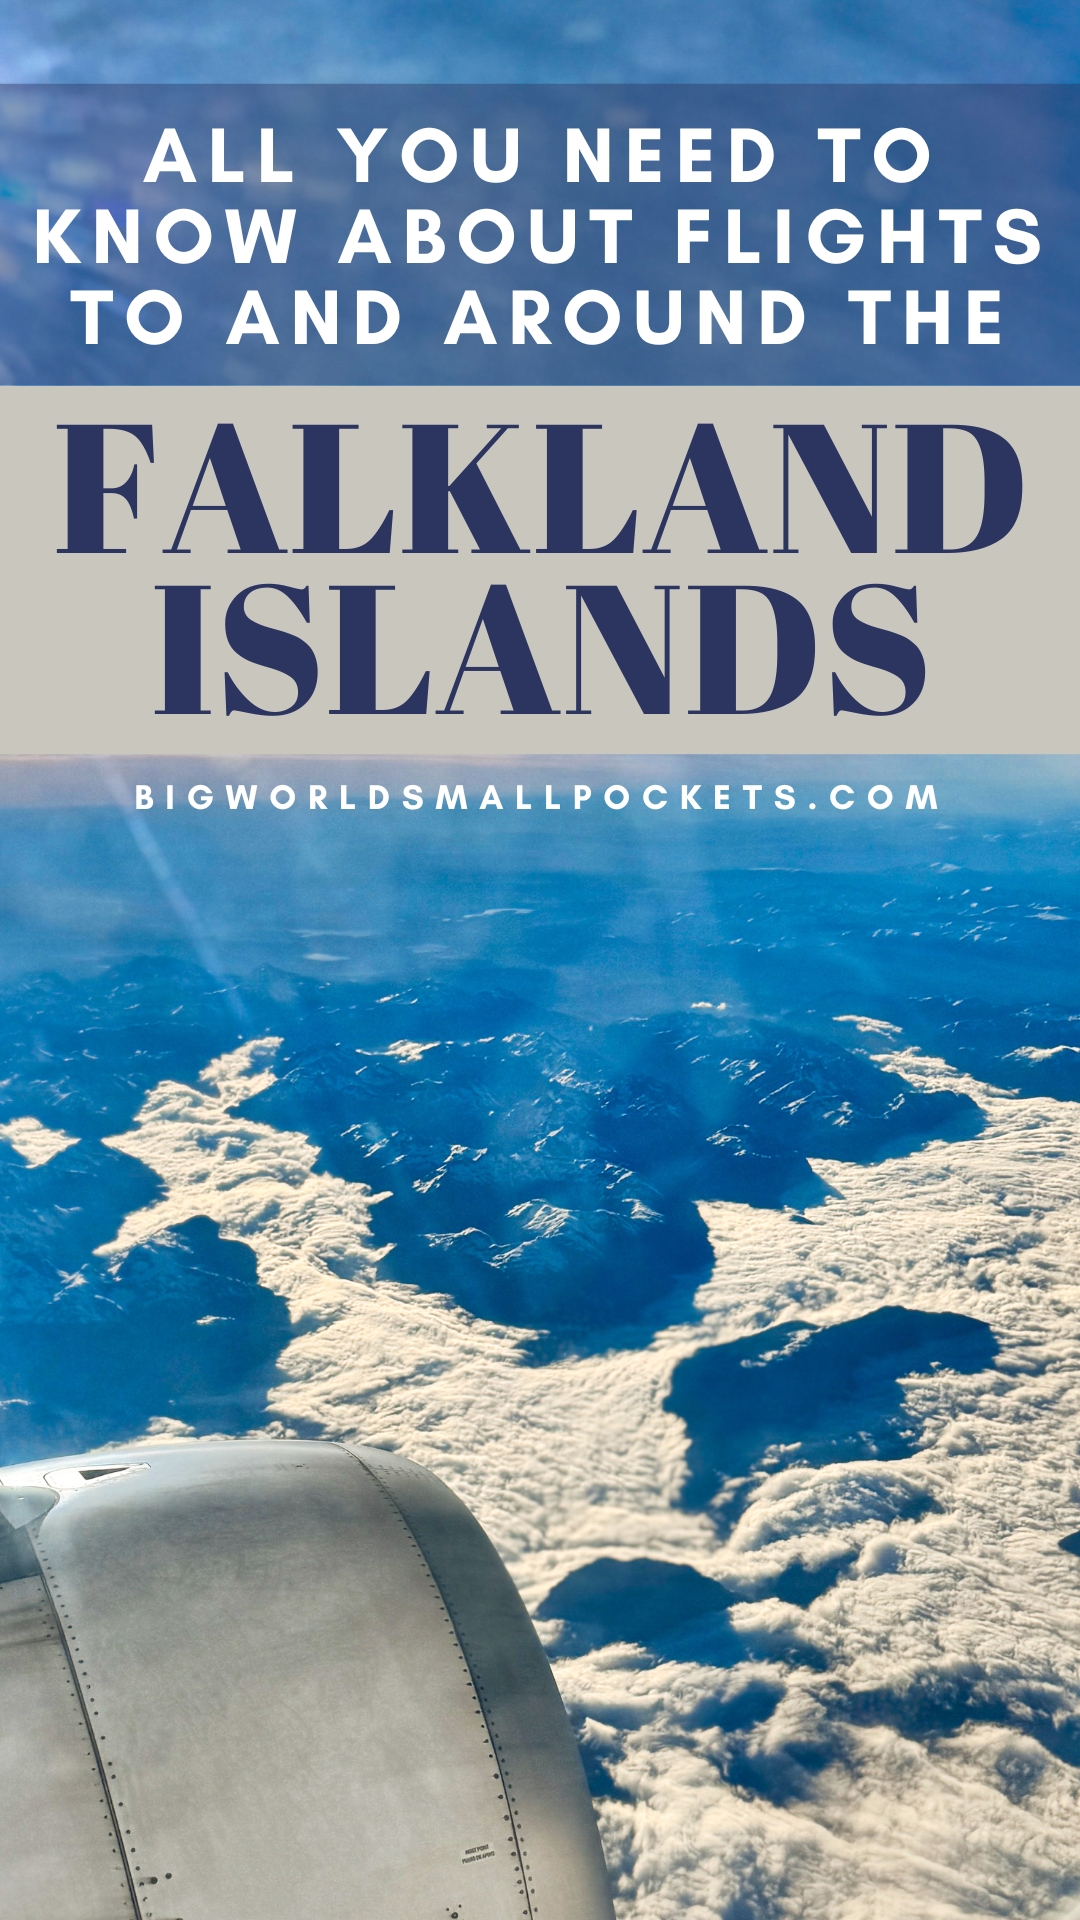 All You Need to Know about Flights To and Around the Falkland Islands